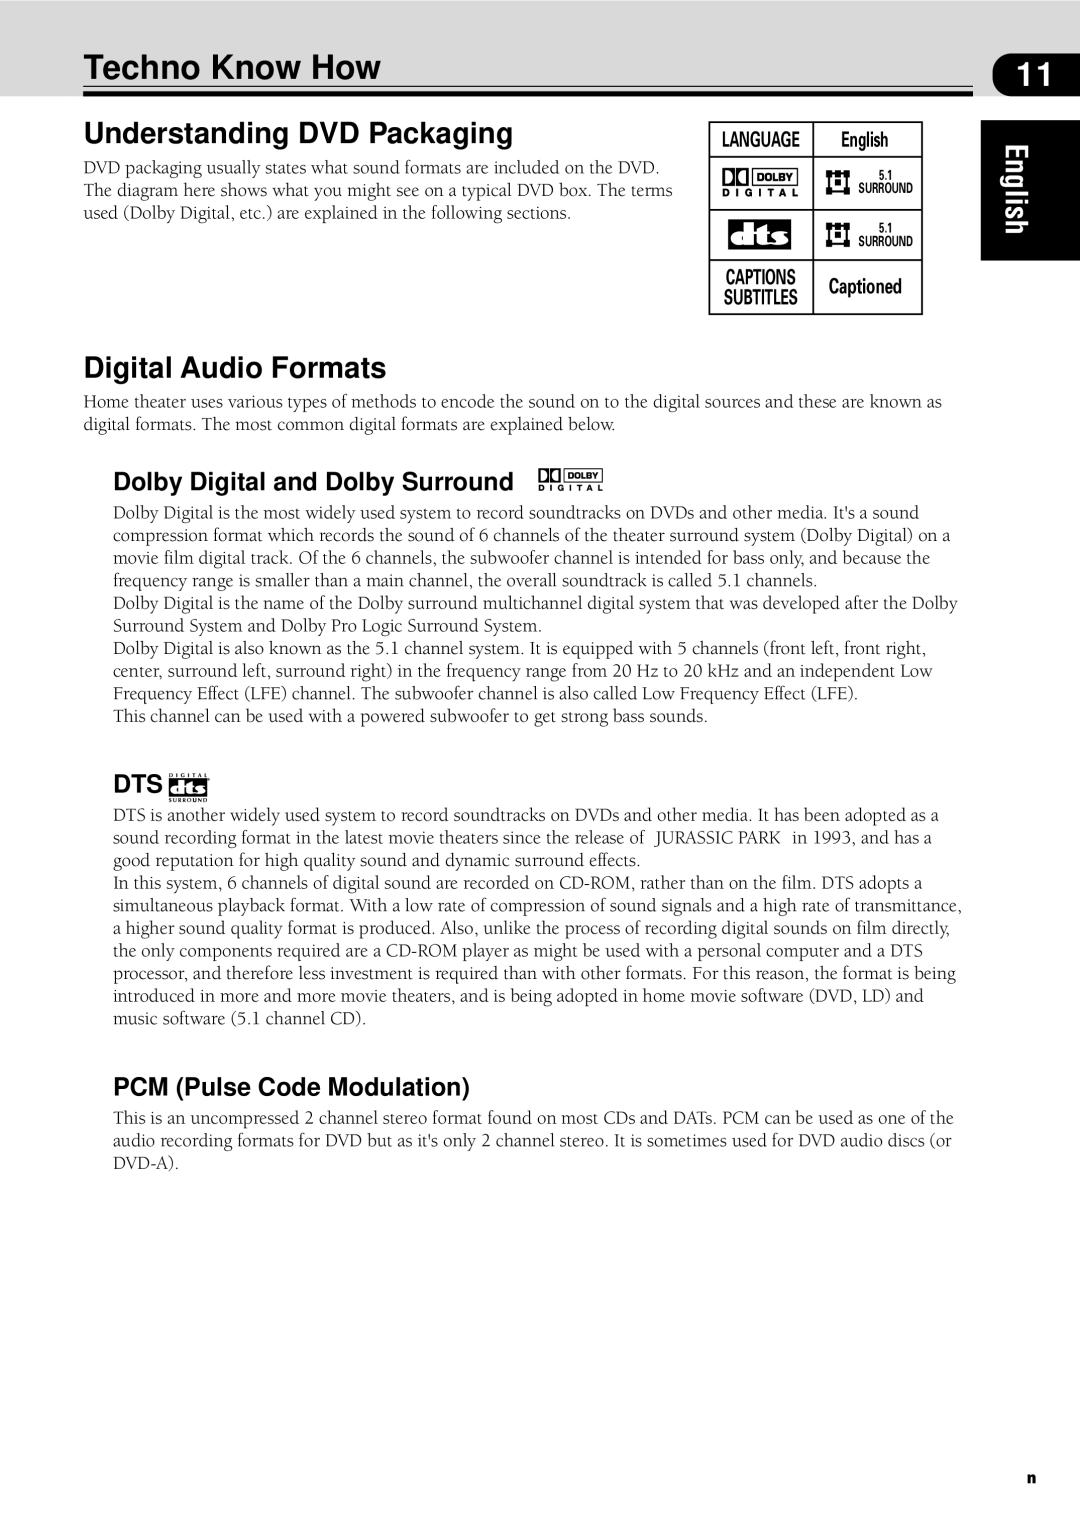 Pioneer VSX-C100-S operating instructions Techno Know How, Understanding DVD Packaging, Digital Audio Formats 